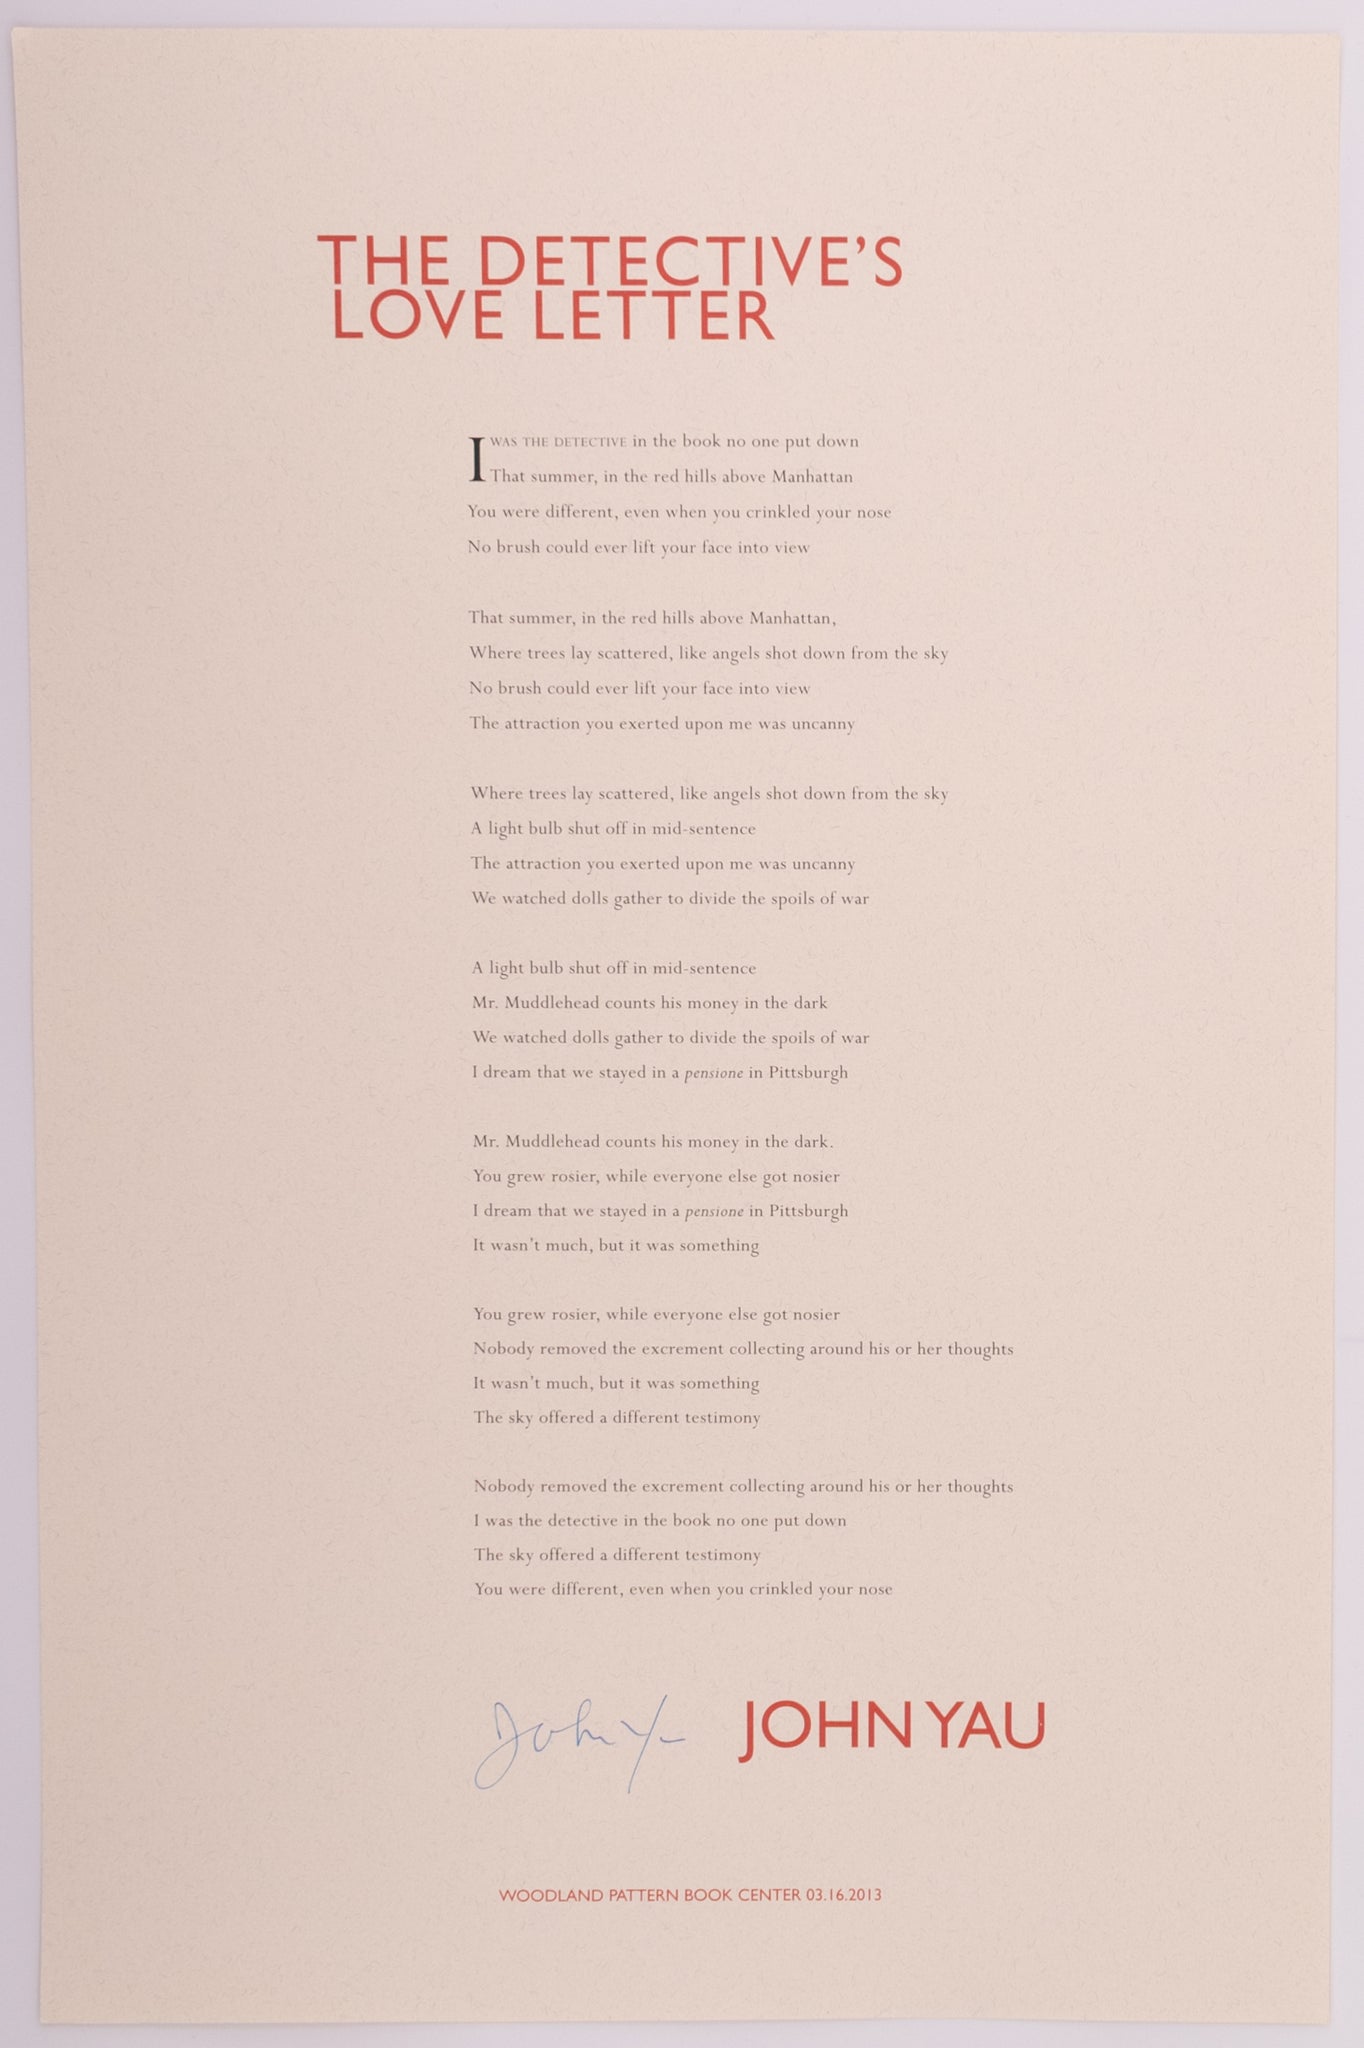 Broadside titled the detective's love letter by John Yau. red and black text on cream paper.